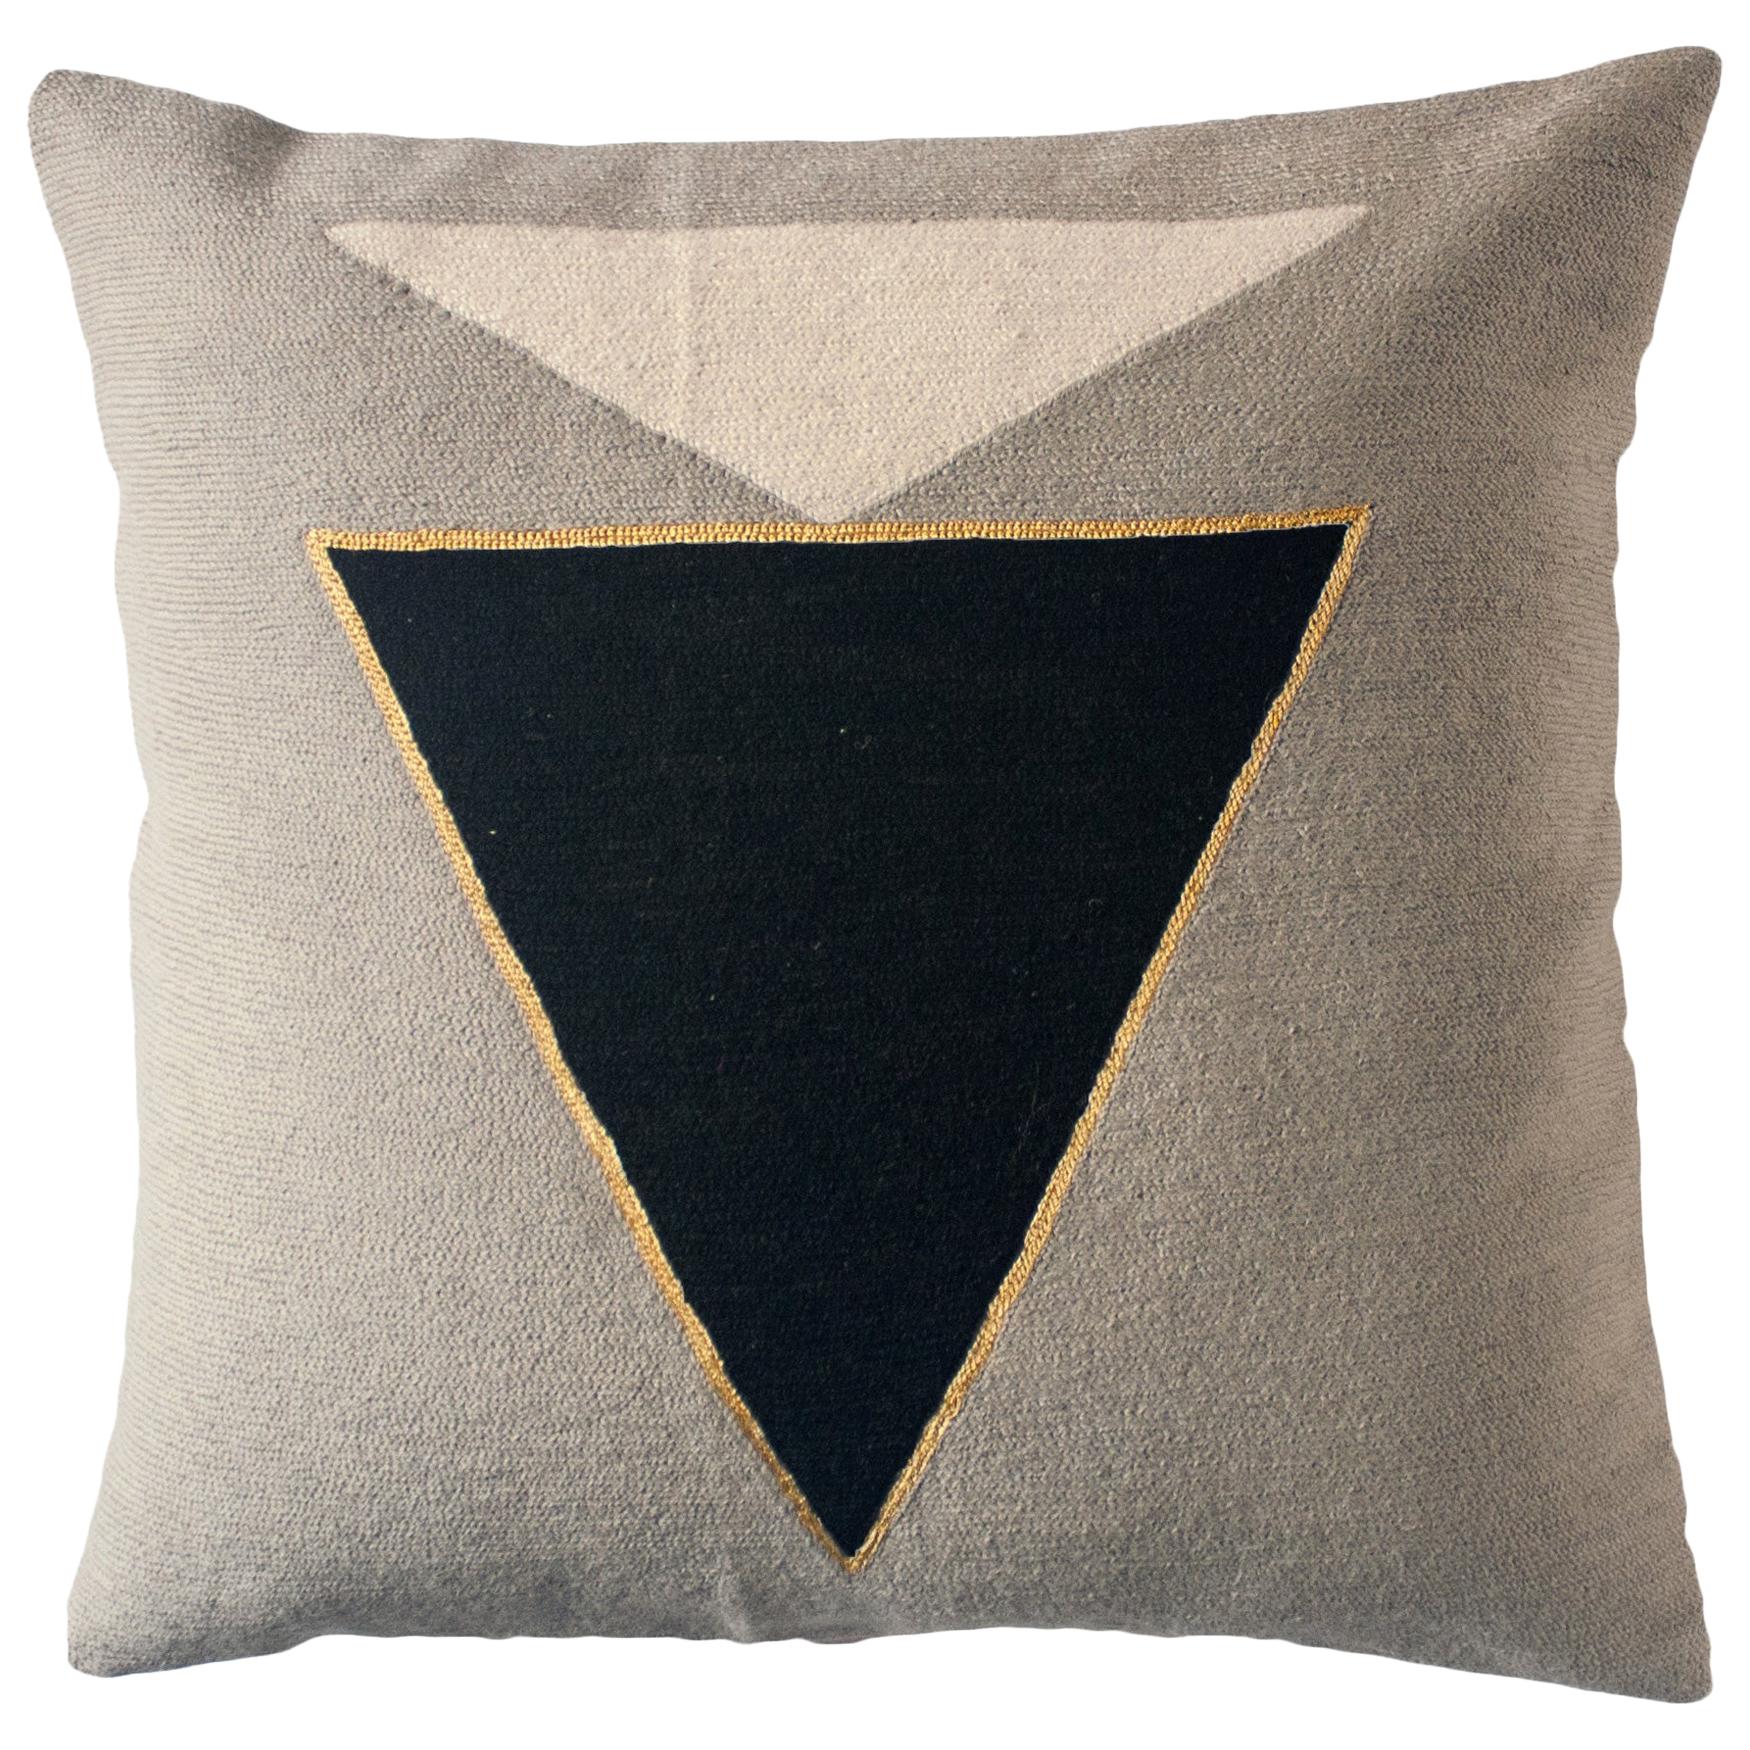 Modern Midnight Jewel Hand Embroidered Geometric Throw Pillow Cover